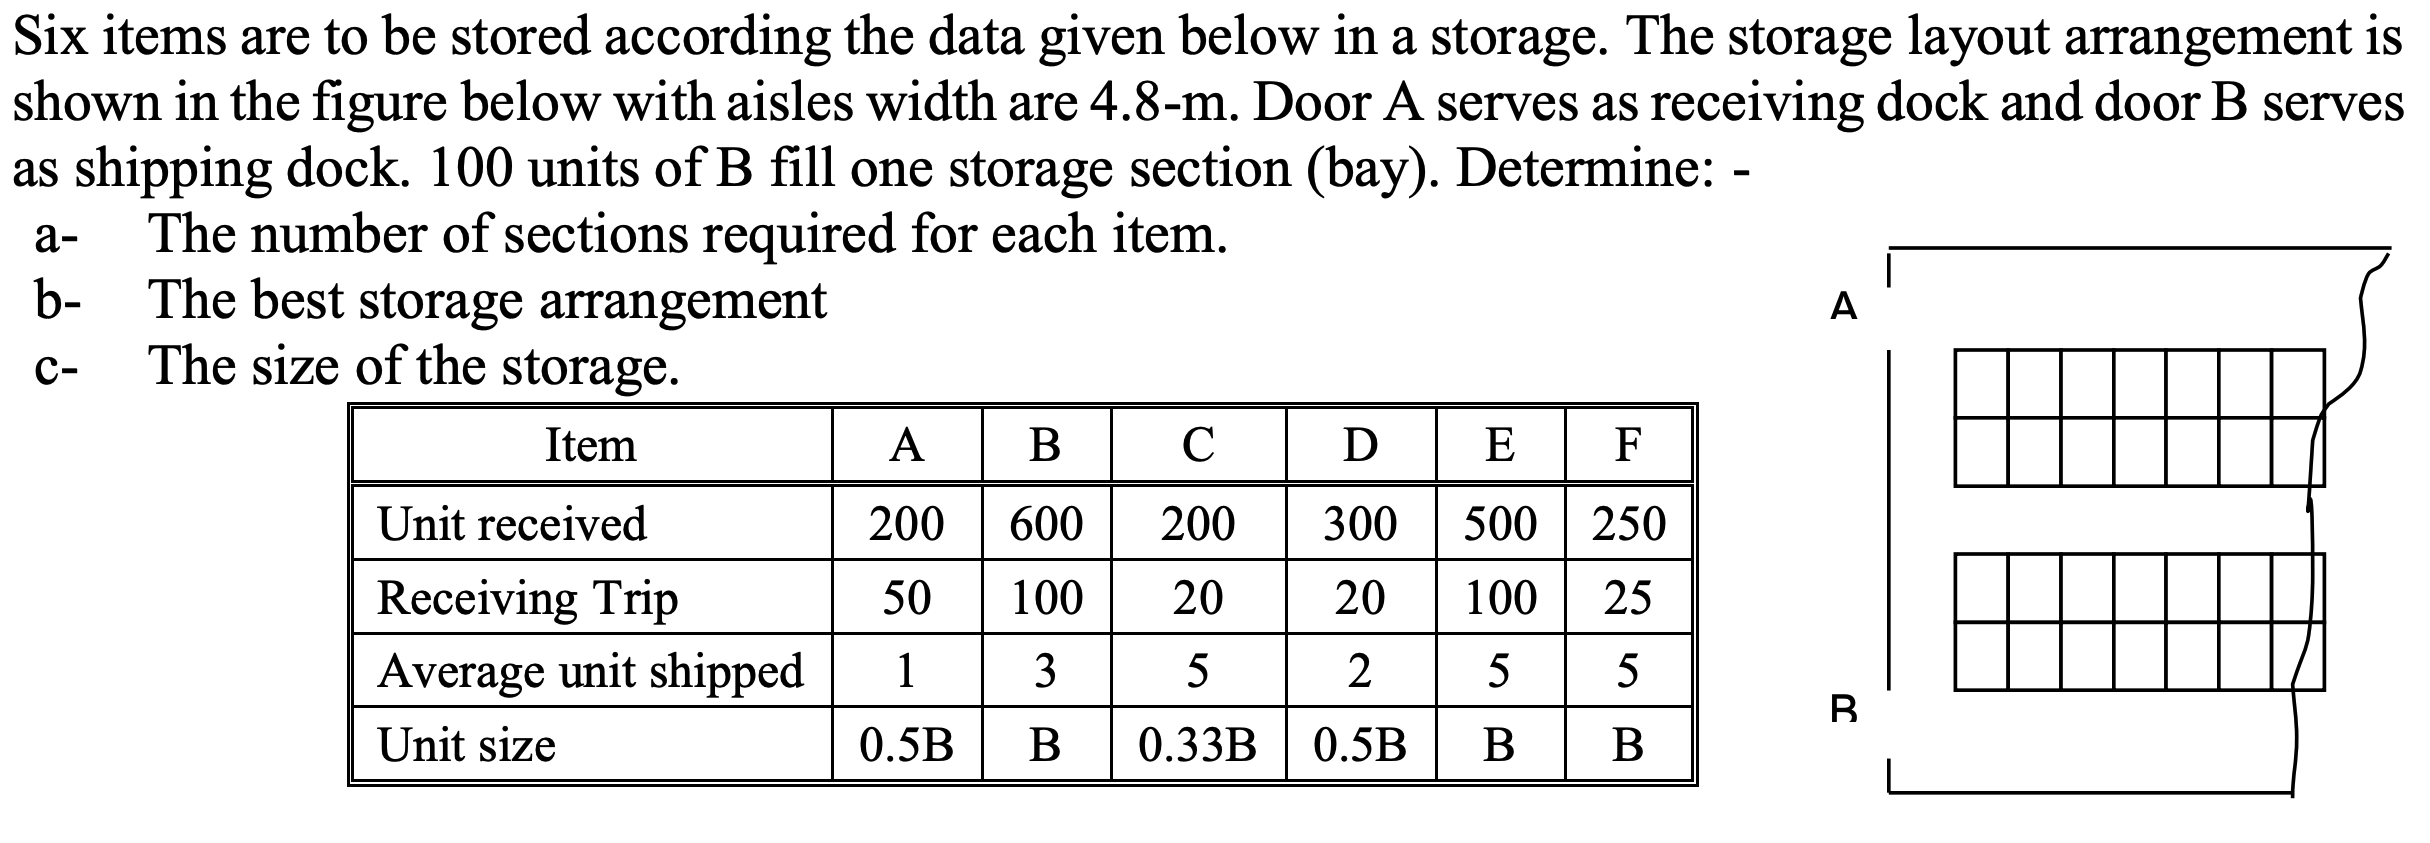 Six items are to be stored according the data given below in a storage. The storage layout arrangement is